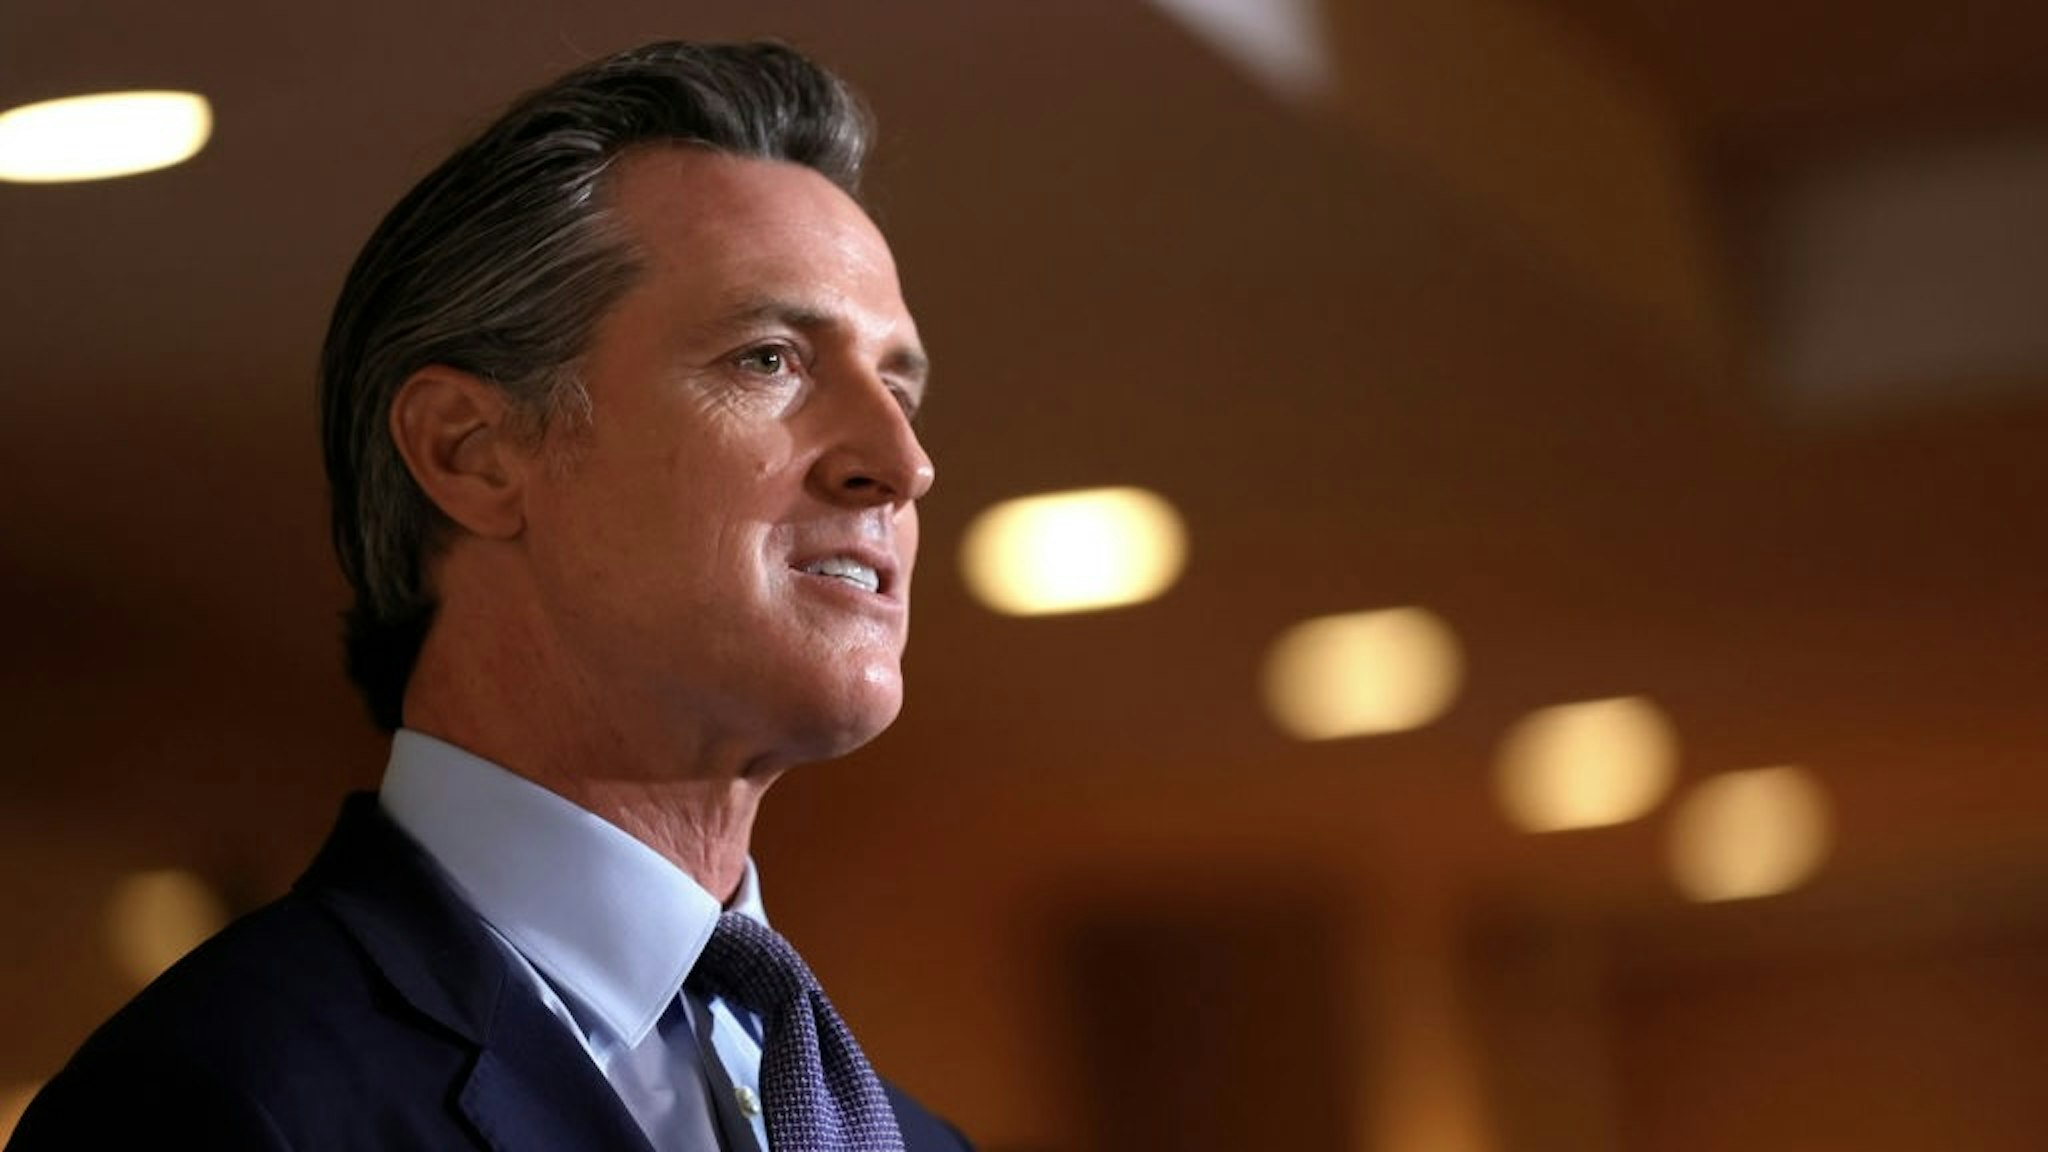 California Governor Newsom Meets With Bay Area AAPI Leaders SAN FRANCISCO, CALIFORNIA - MARCH 19: California Gov. Gavin Newsom speaks during a news conference with Bay Area AAPI leaders at the Chinese Culture Center of San Francisco on March 19, 2021 in San Francisco, California. California Gov. Gavin Newsom met with San Francisco Bay Area AAPI leaders to discuss the increase in violence against the Asian community and the recent series of shootings at spas in the Atlanta area that left eight people dead, including six Asian women. (Photo by Justin Sullivan/Getty Images) Justin Sullivan / Staff via Getty Images